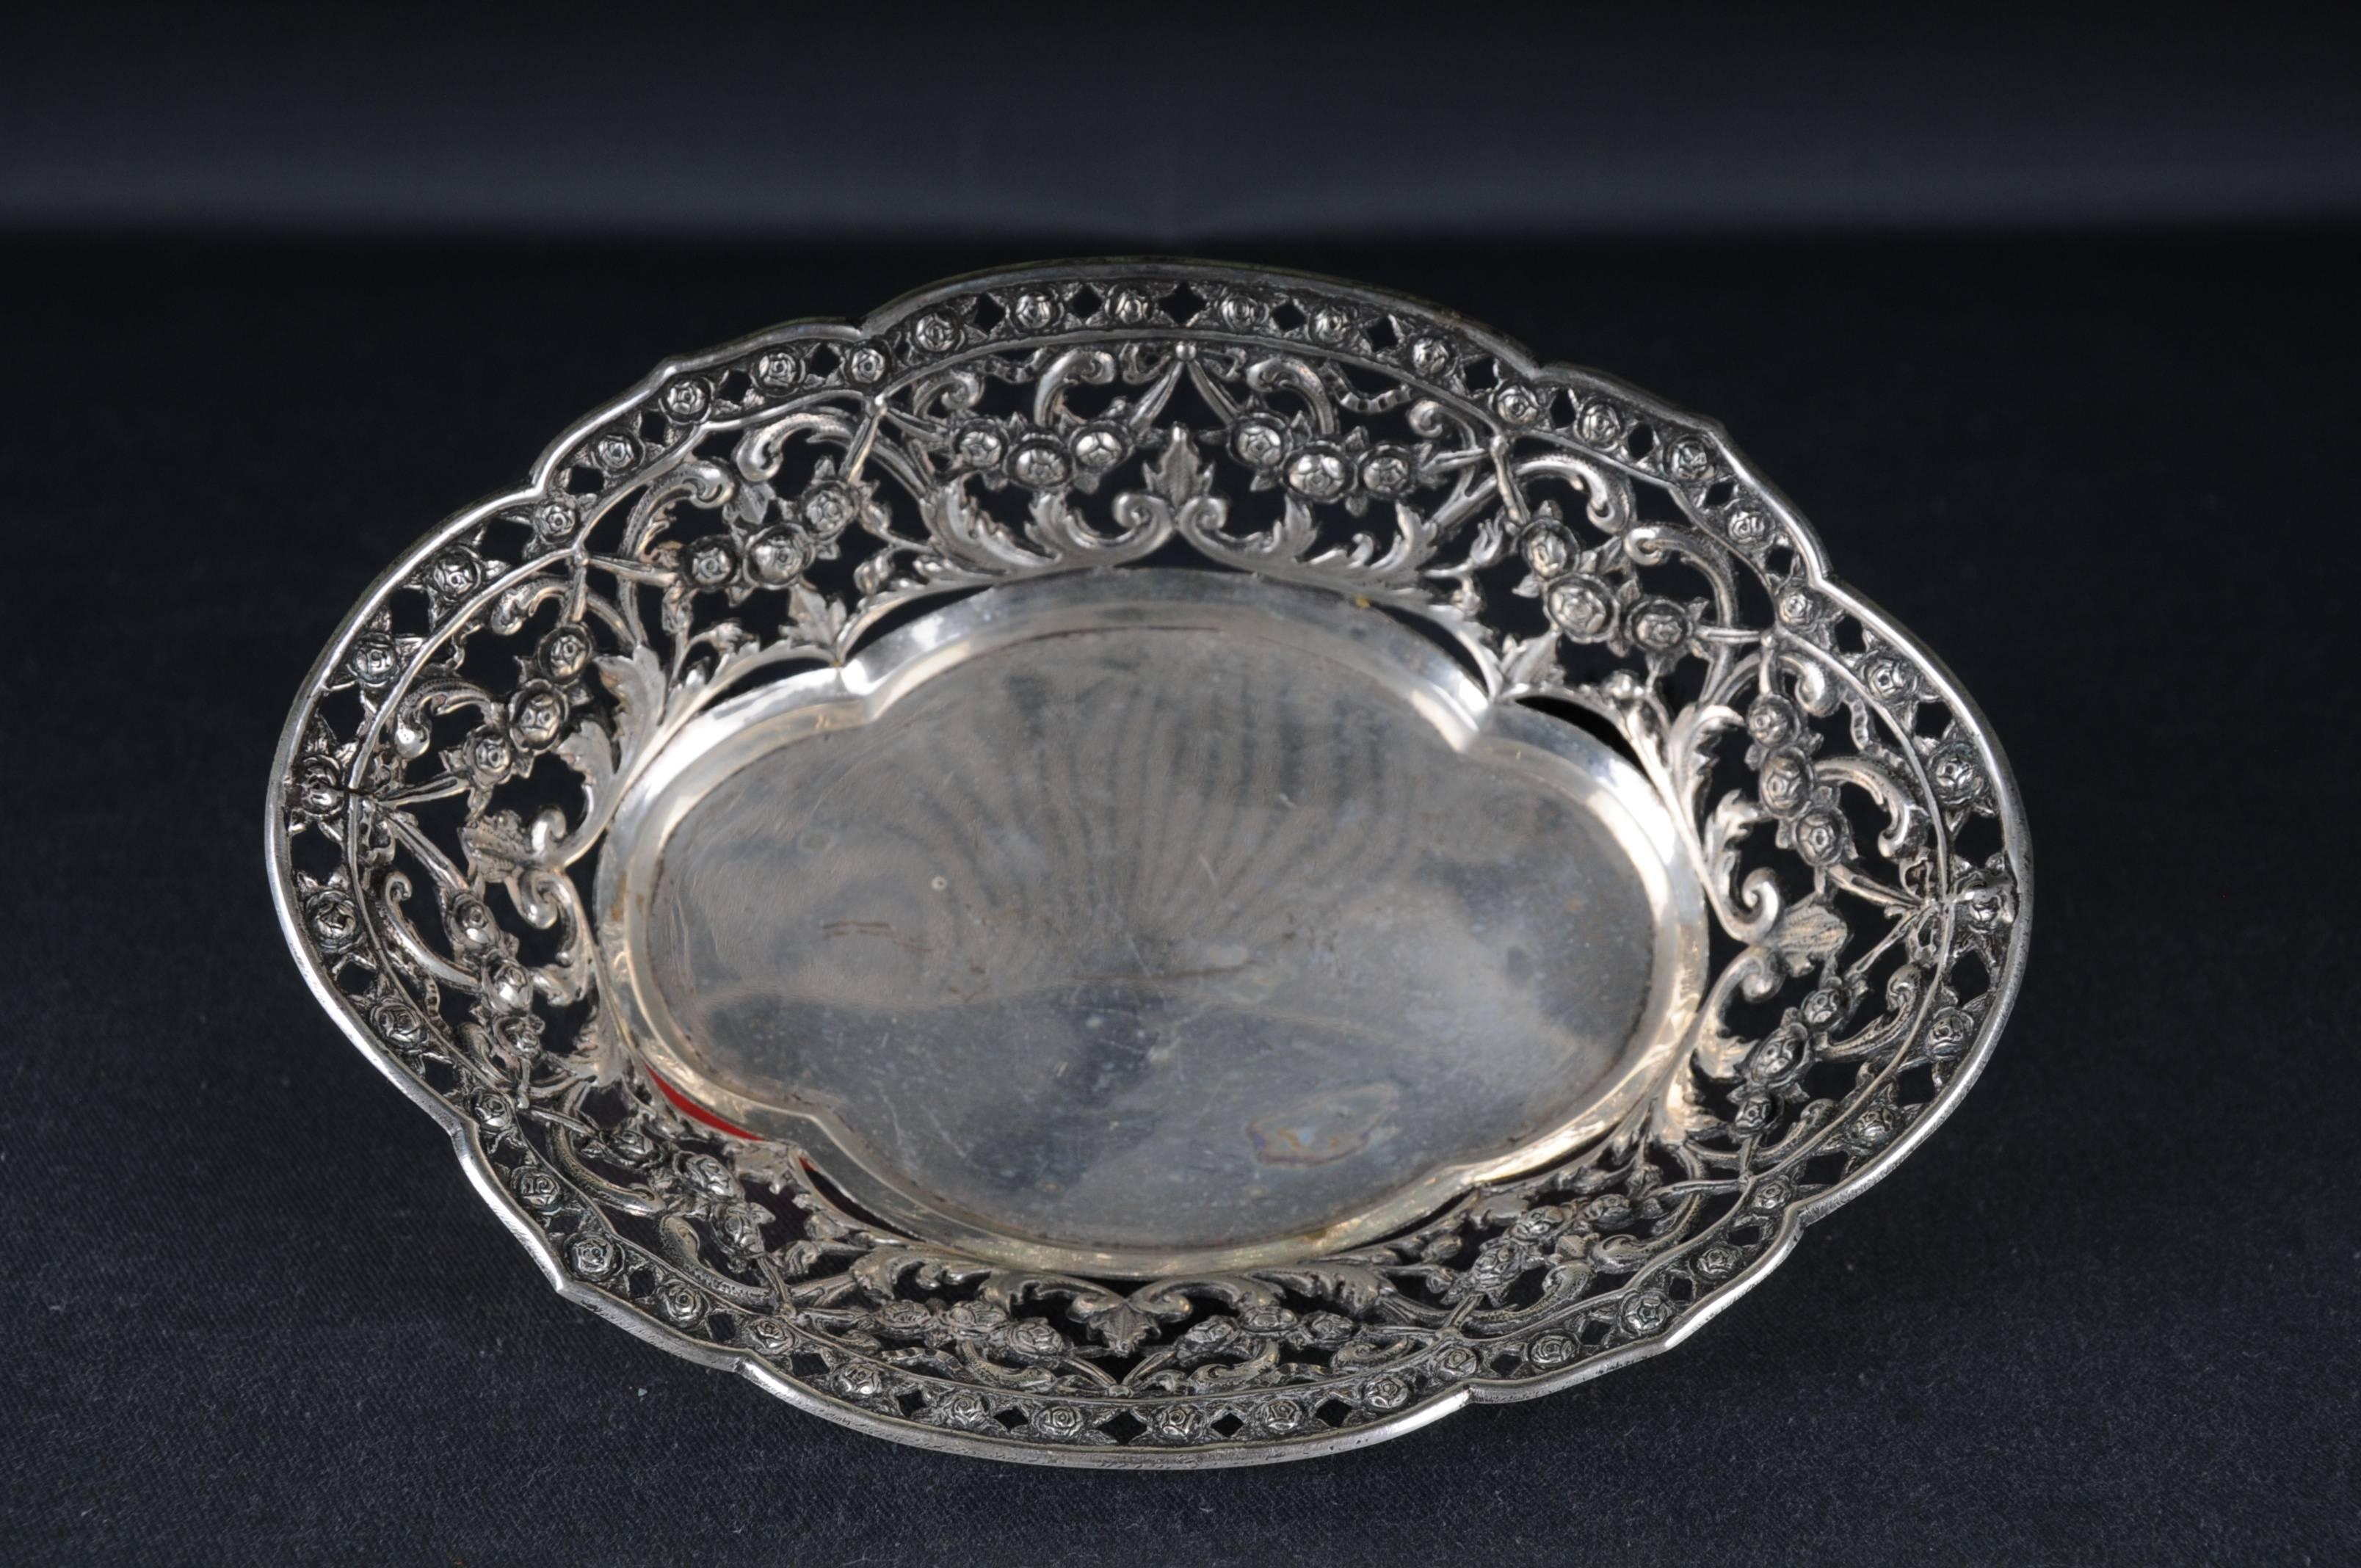 Antique 800 Silver Bread Basket bowl Germany Flowers

Weight 117 grams

The condition can be seen in the pictures.